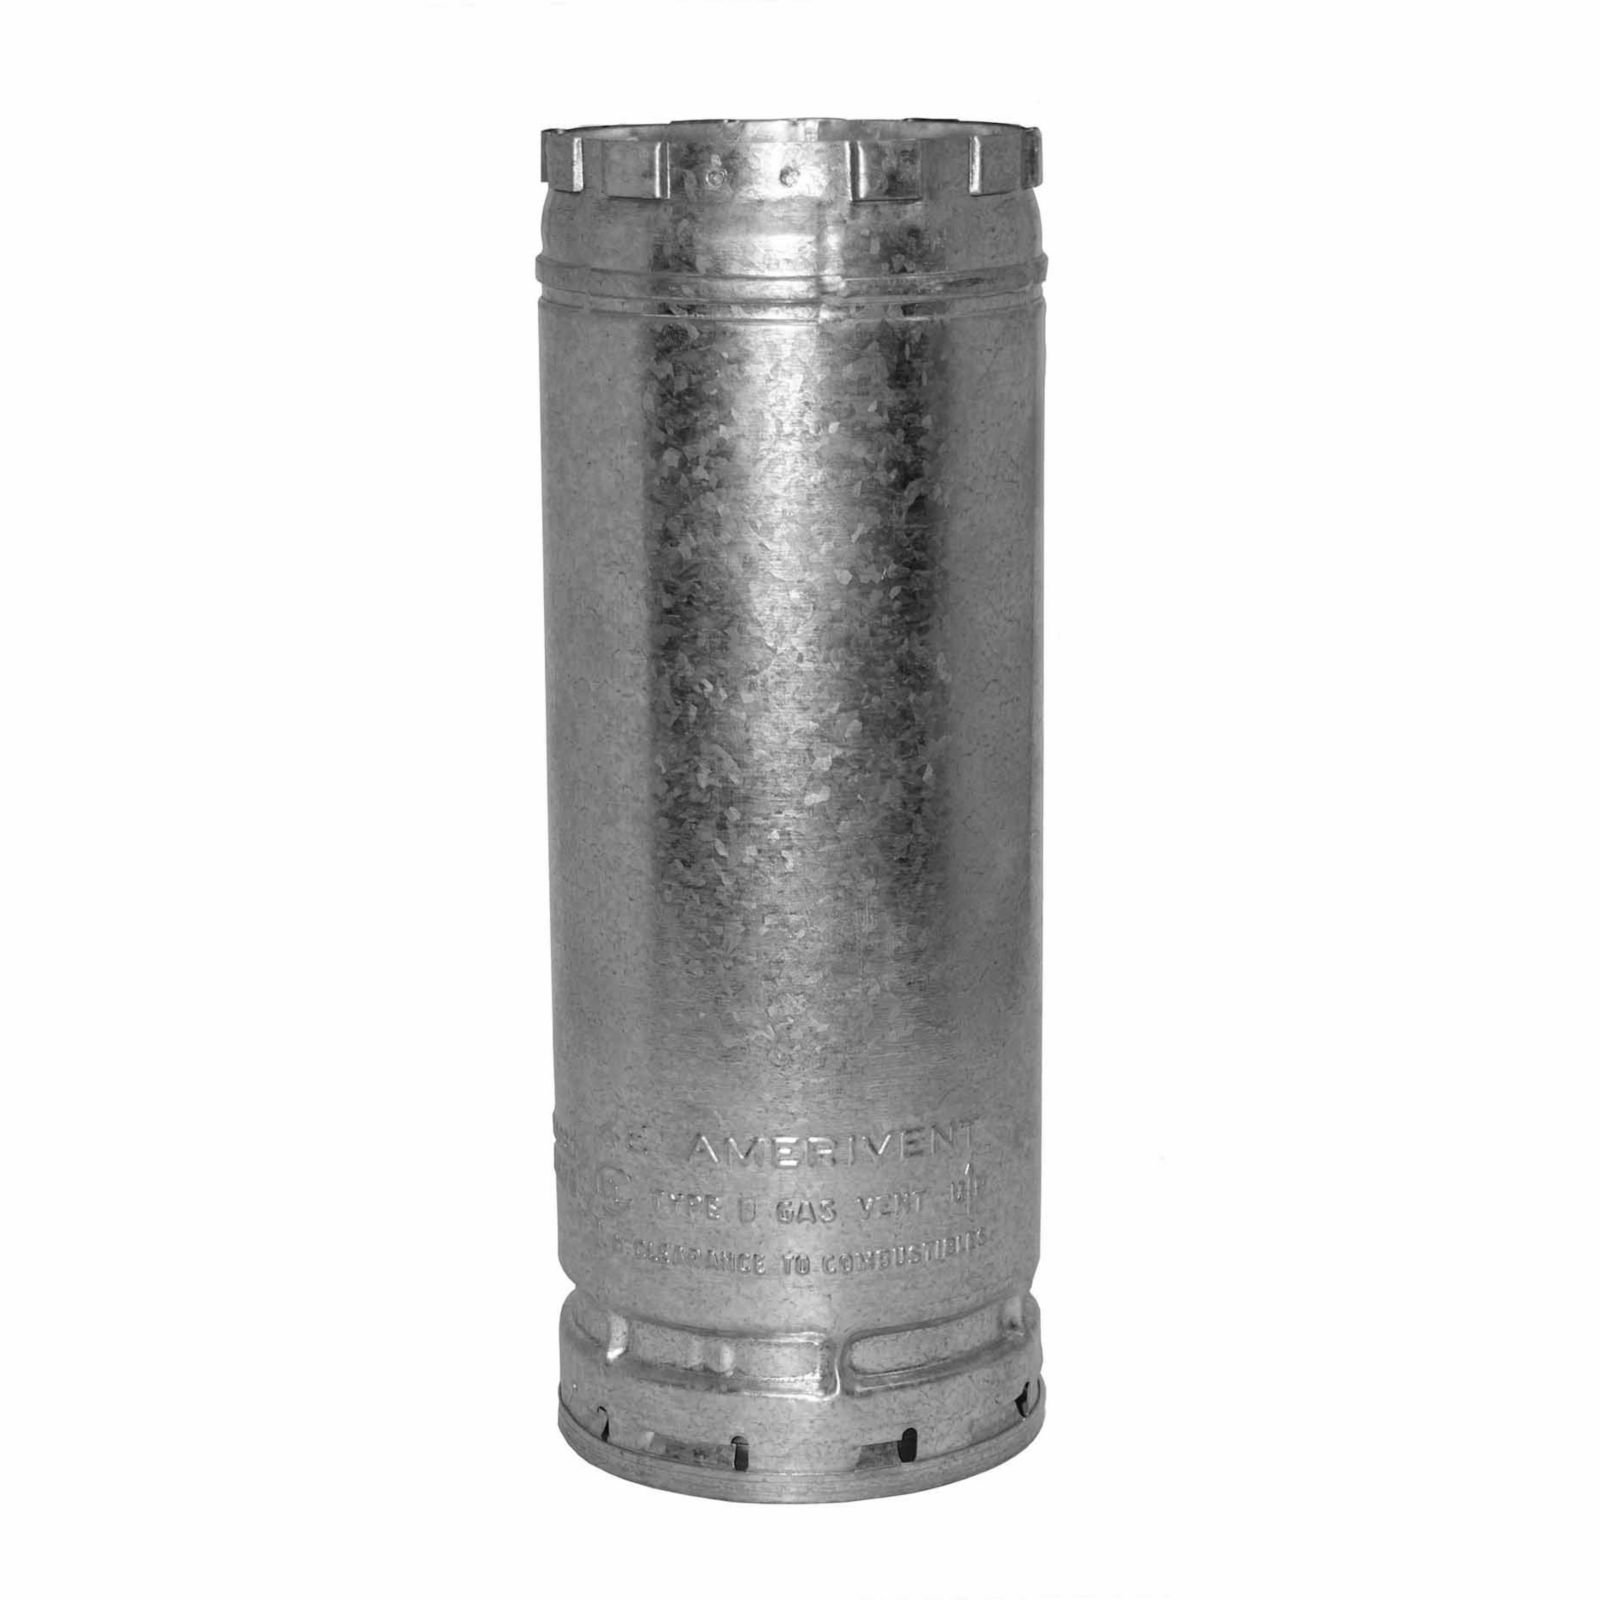 AmeriVent 4E18 - Pipe Section Type B Gas Vent, 4" Round X 18" Length